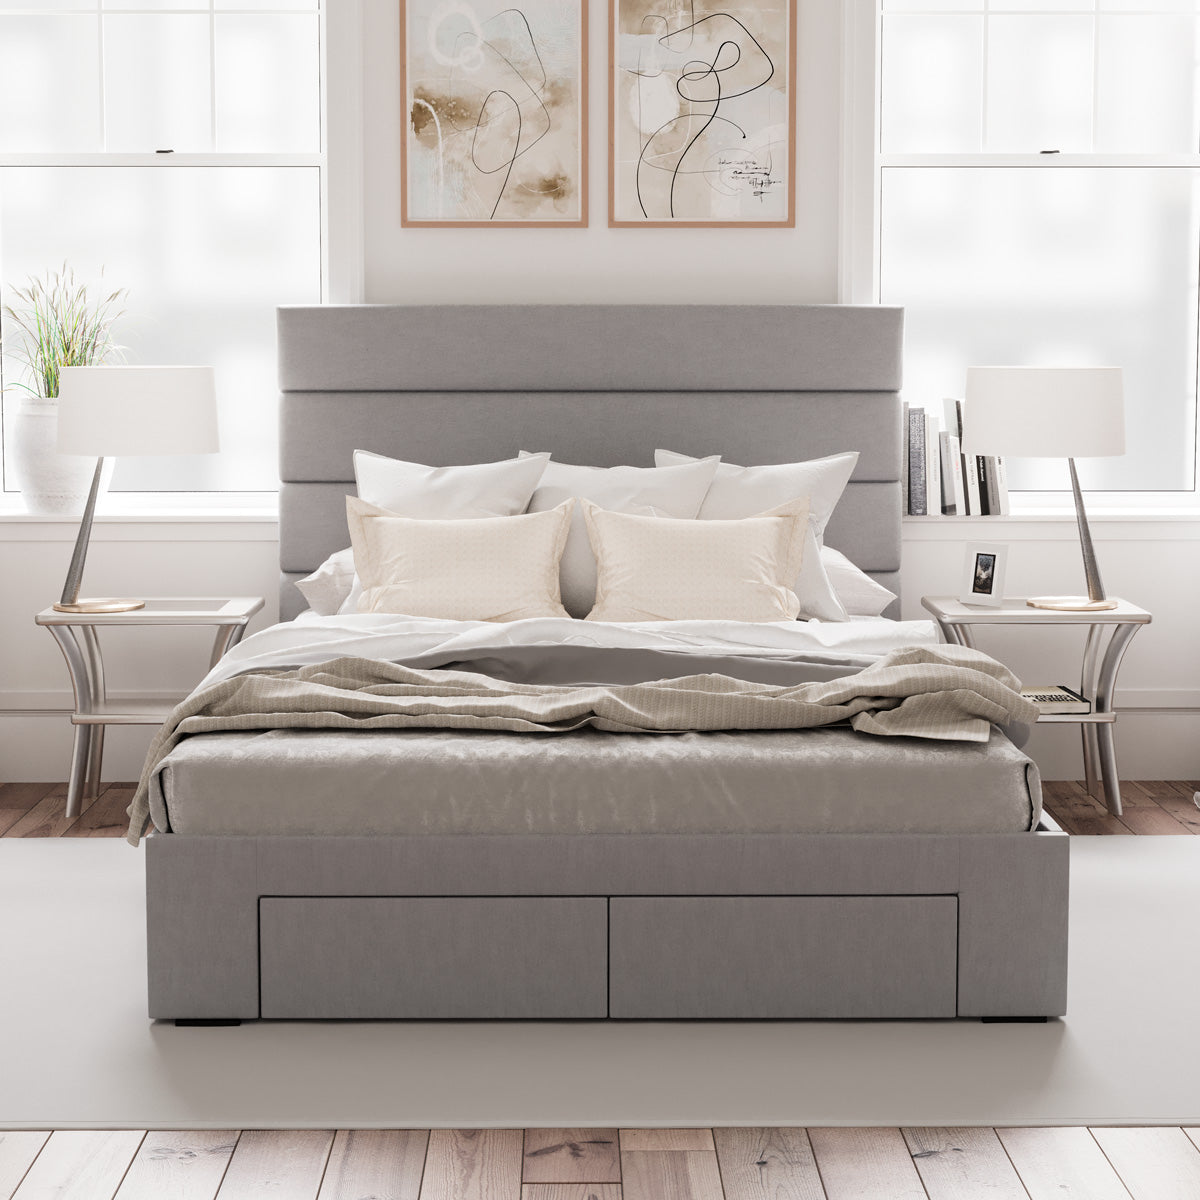 Benny Bed Frame with Four Storage Drawers (Grey Fabric)